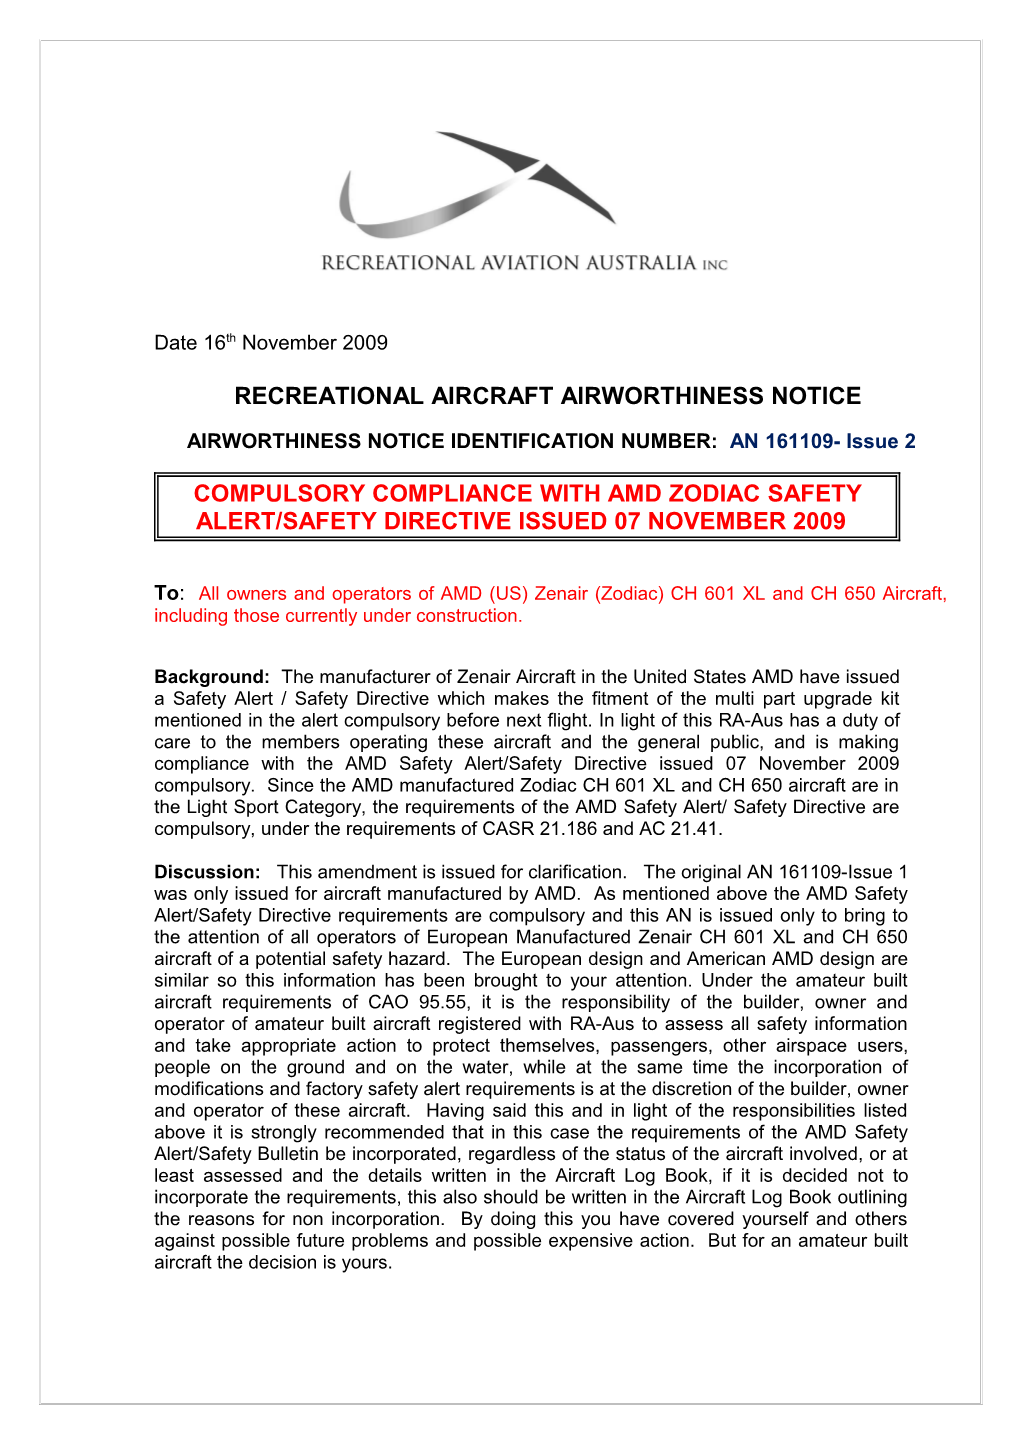 Recreational Aircraft Airworthiness Notice